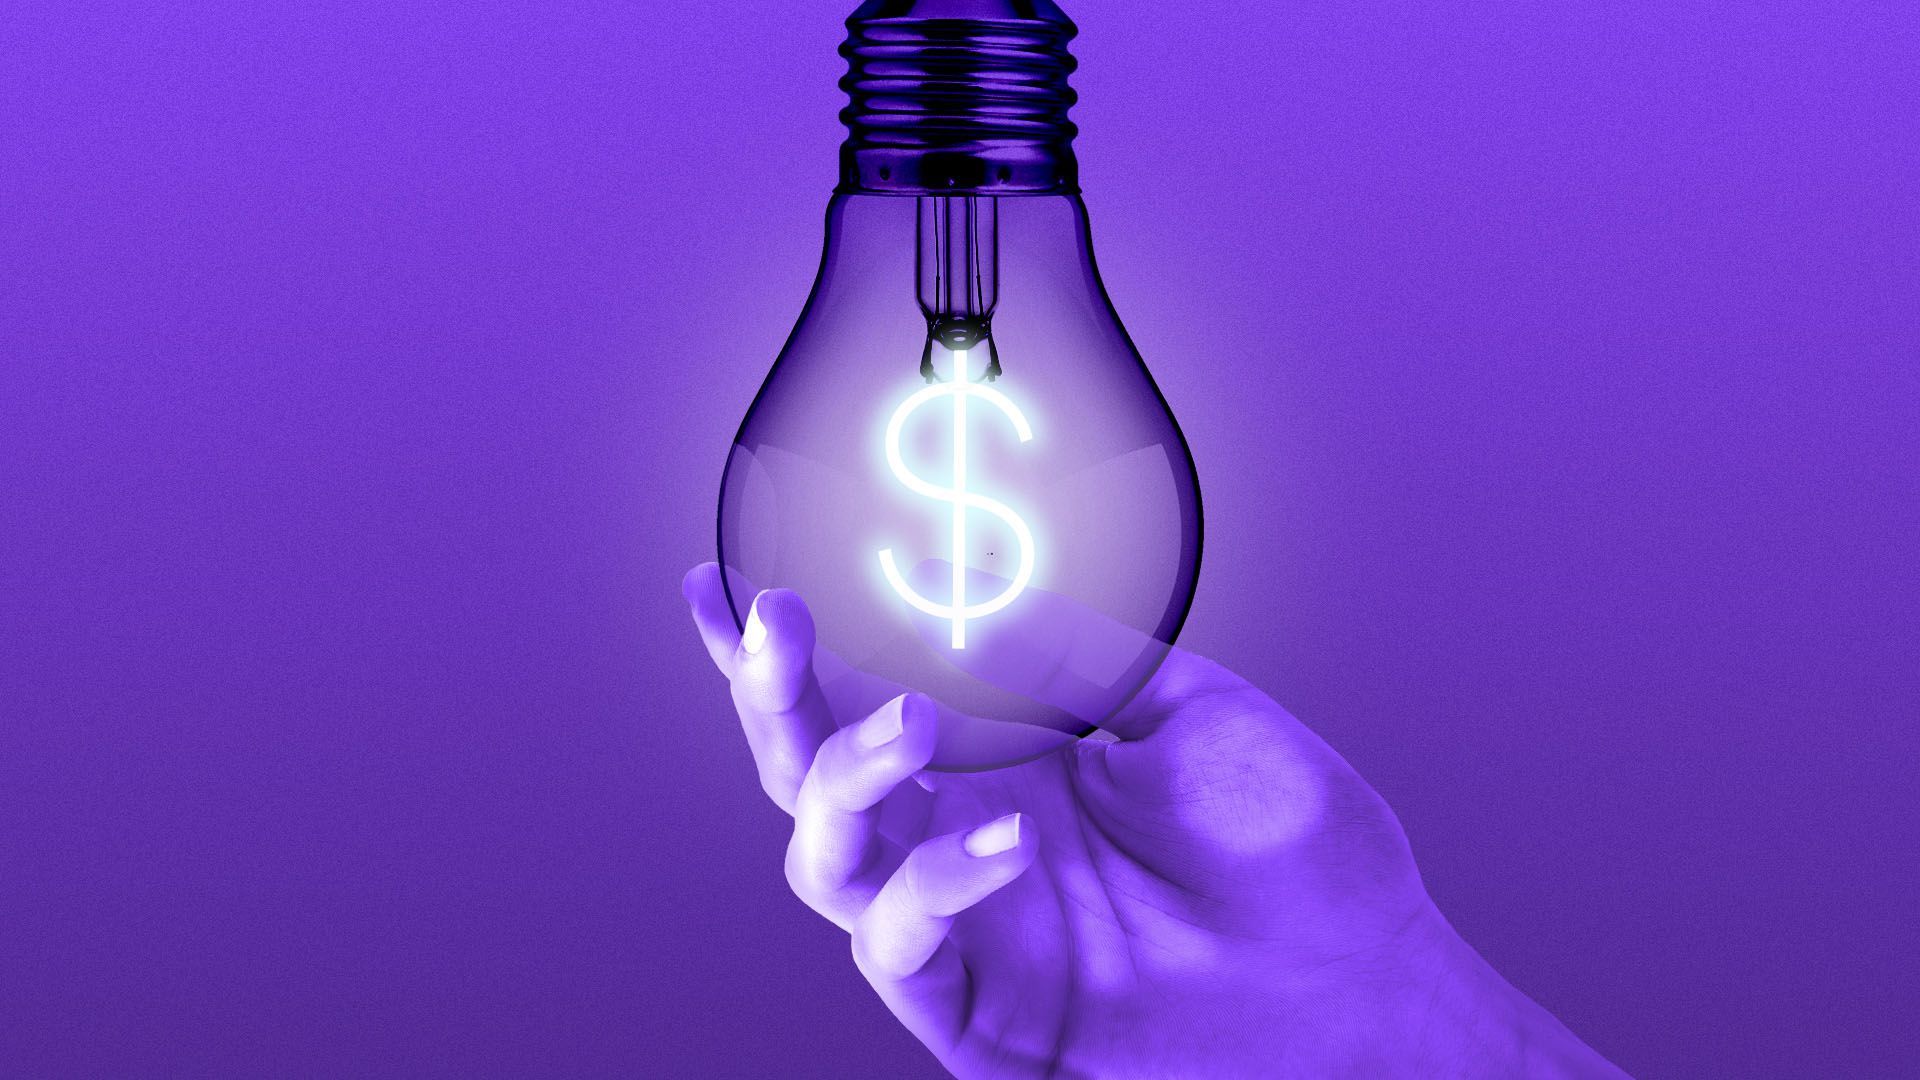 Illustration of a woman's hand holding a lightbulb with a dollar sign for the filament